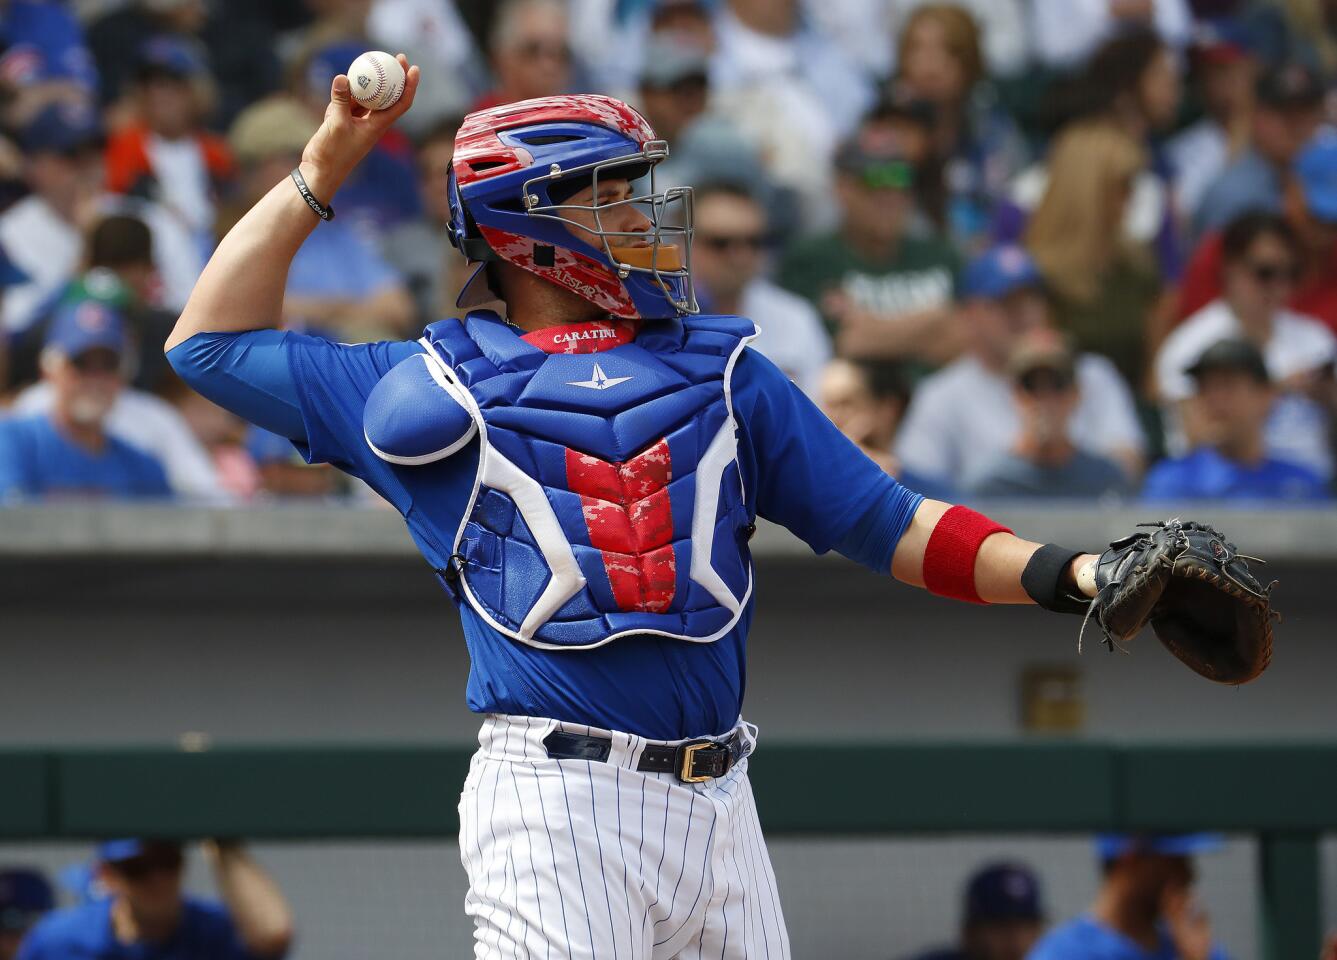 Cubs catcher Victor Caratini throws against the Arizona Diamondbacks during the third inning of a spring training baseball game Thursday, March 15, 2018, in Mesa, Ariz.